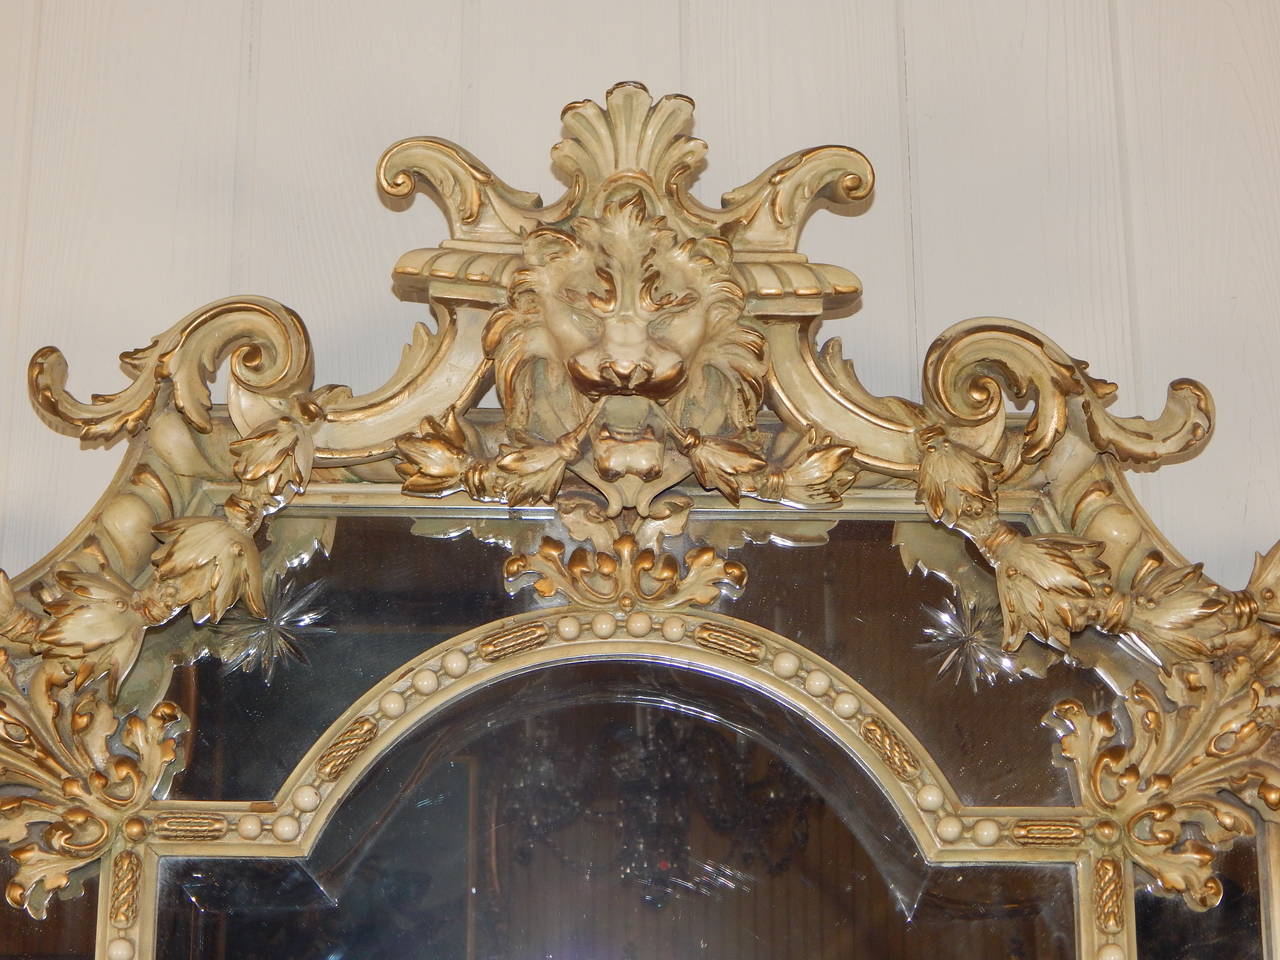 Fantastic cream colored enamel painted carved mirror with gilt highlights, and an incredible lion's face at the top, with a border of scrolls and ornaments. It also features beveled glass, along with incised cut glass stars.